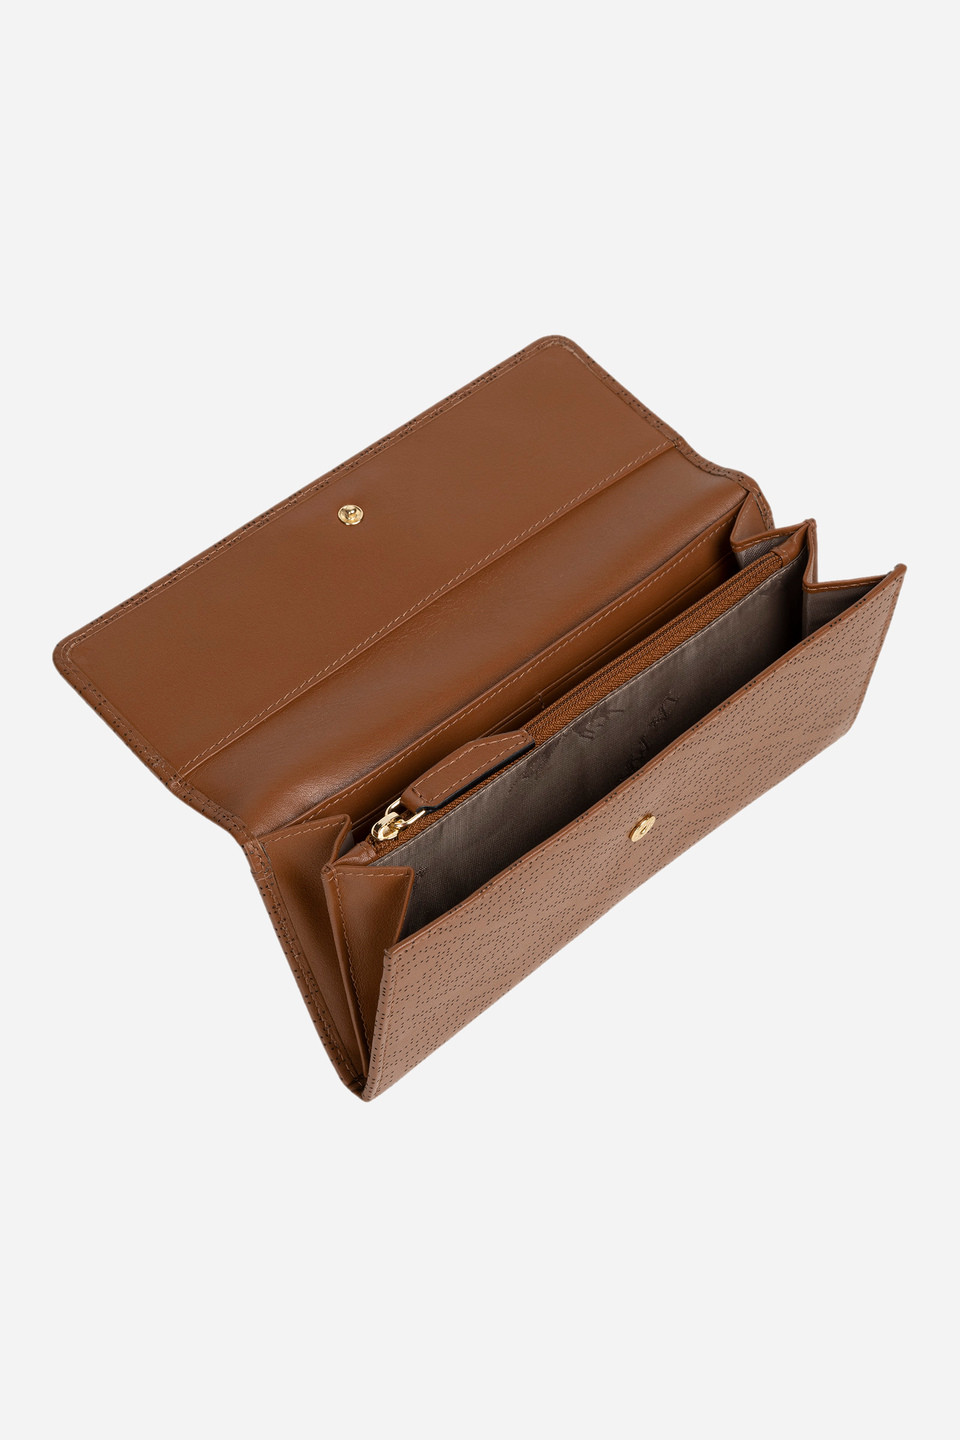 Women's wallet with automatic fastening in leather - Soledad | La Martina - Official Online Shop